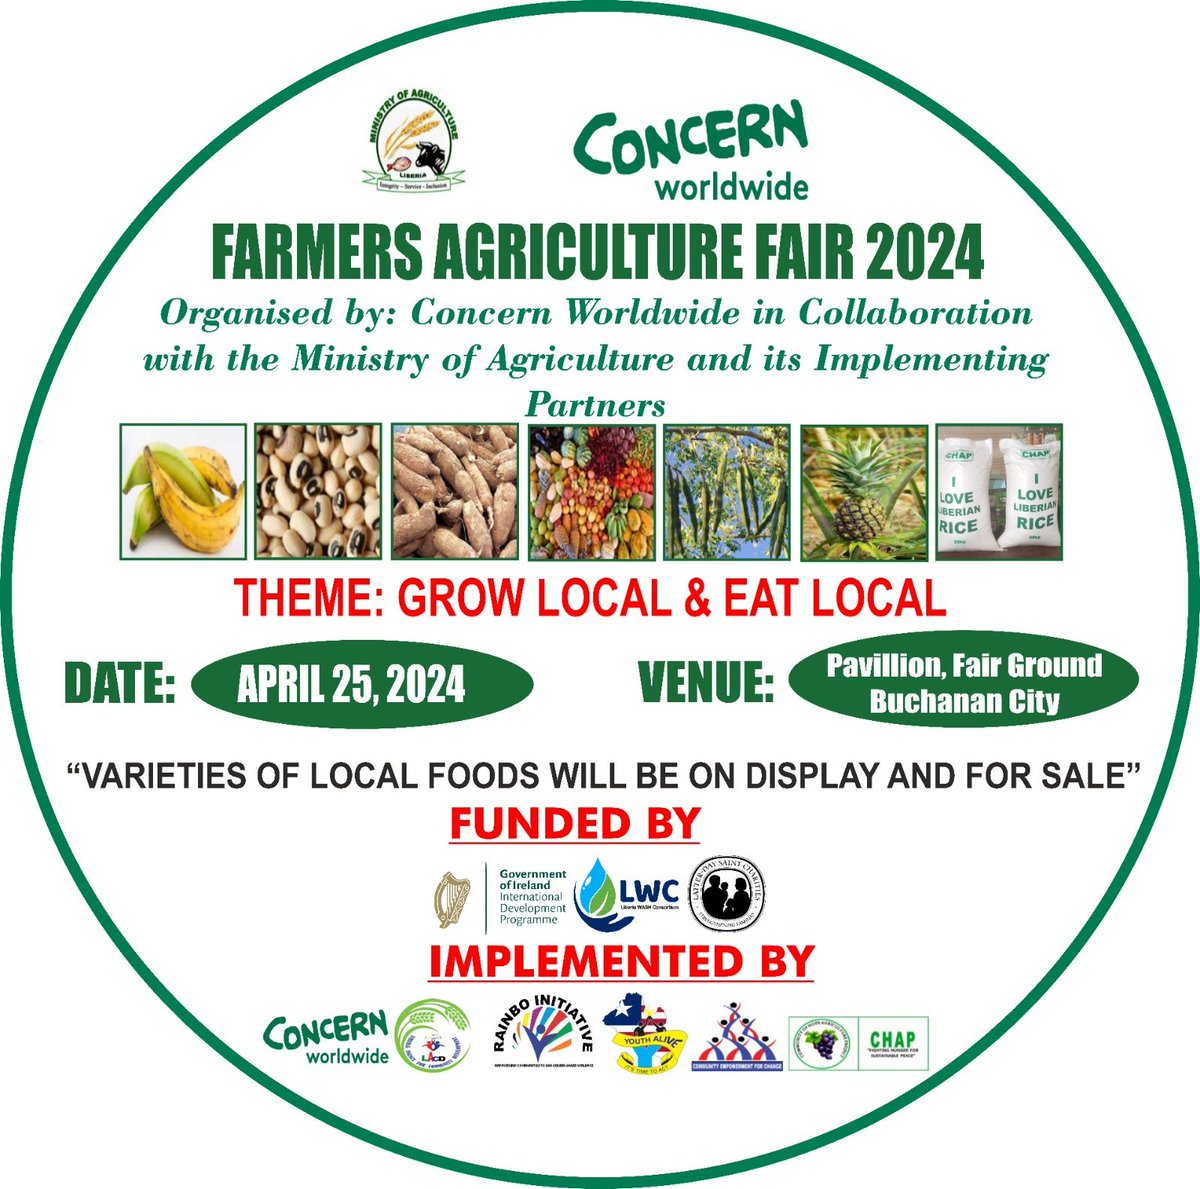 We are so excited for the Farmers Agriculture Fair 2024 tomorrow in Buchanan. @Concern are working on #foodsystems strengthening market linkages for farmers supported @Irish_Aid @irlembliberia